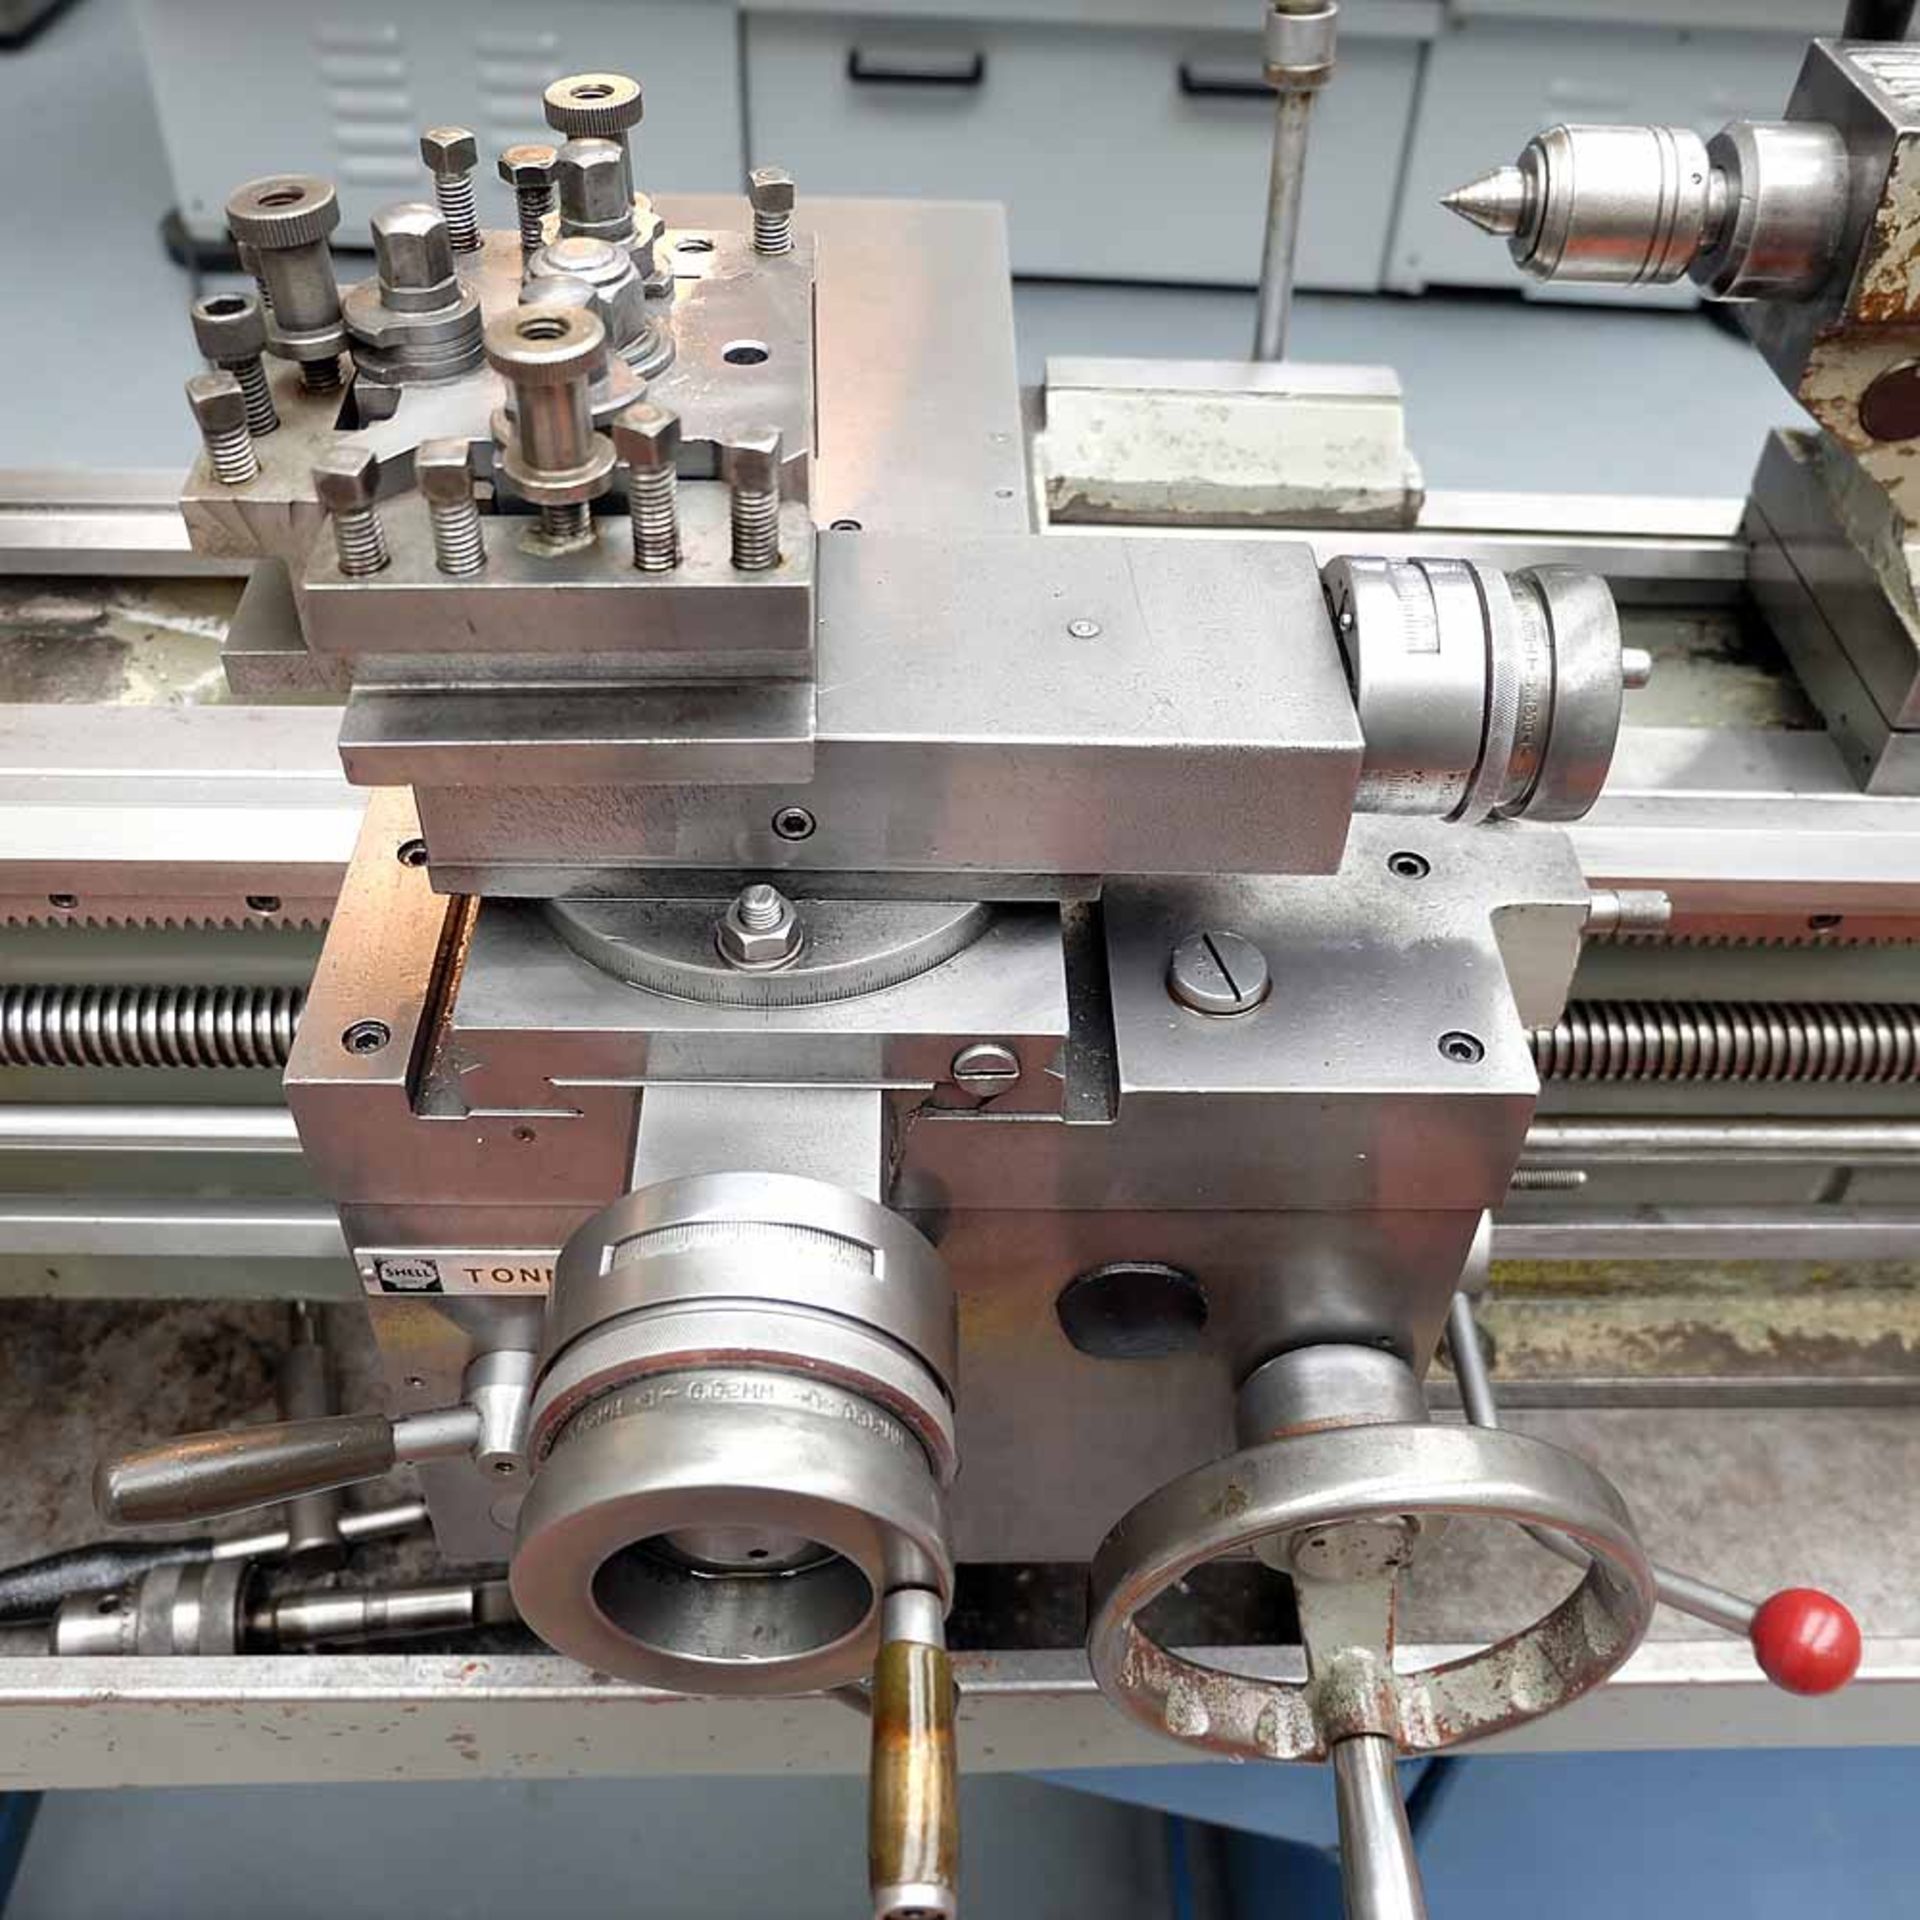 Colchester Student 1800 Gap Bed Centre Lathe. Capacity 13" Diameter x 25" Between Centres. - Image 3 of 6